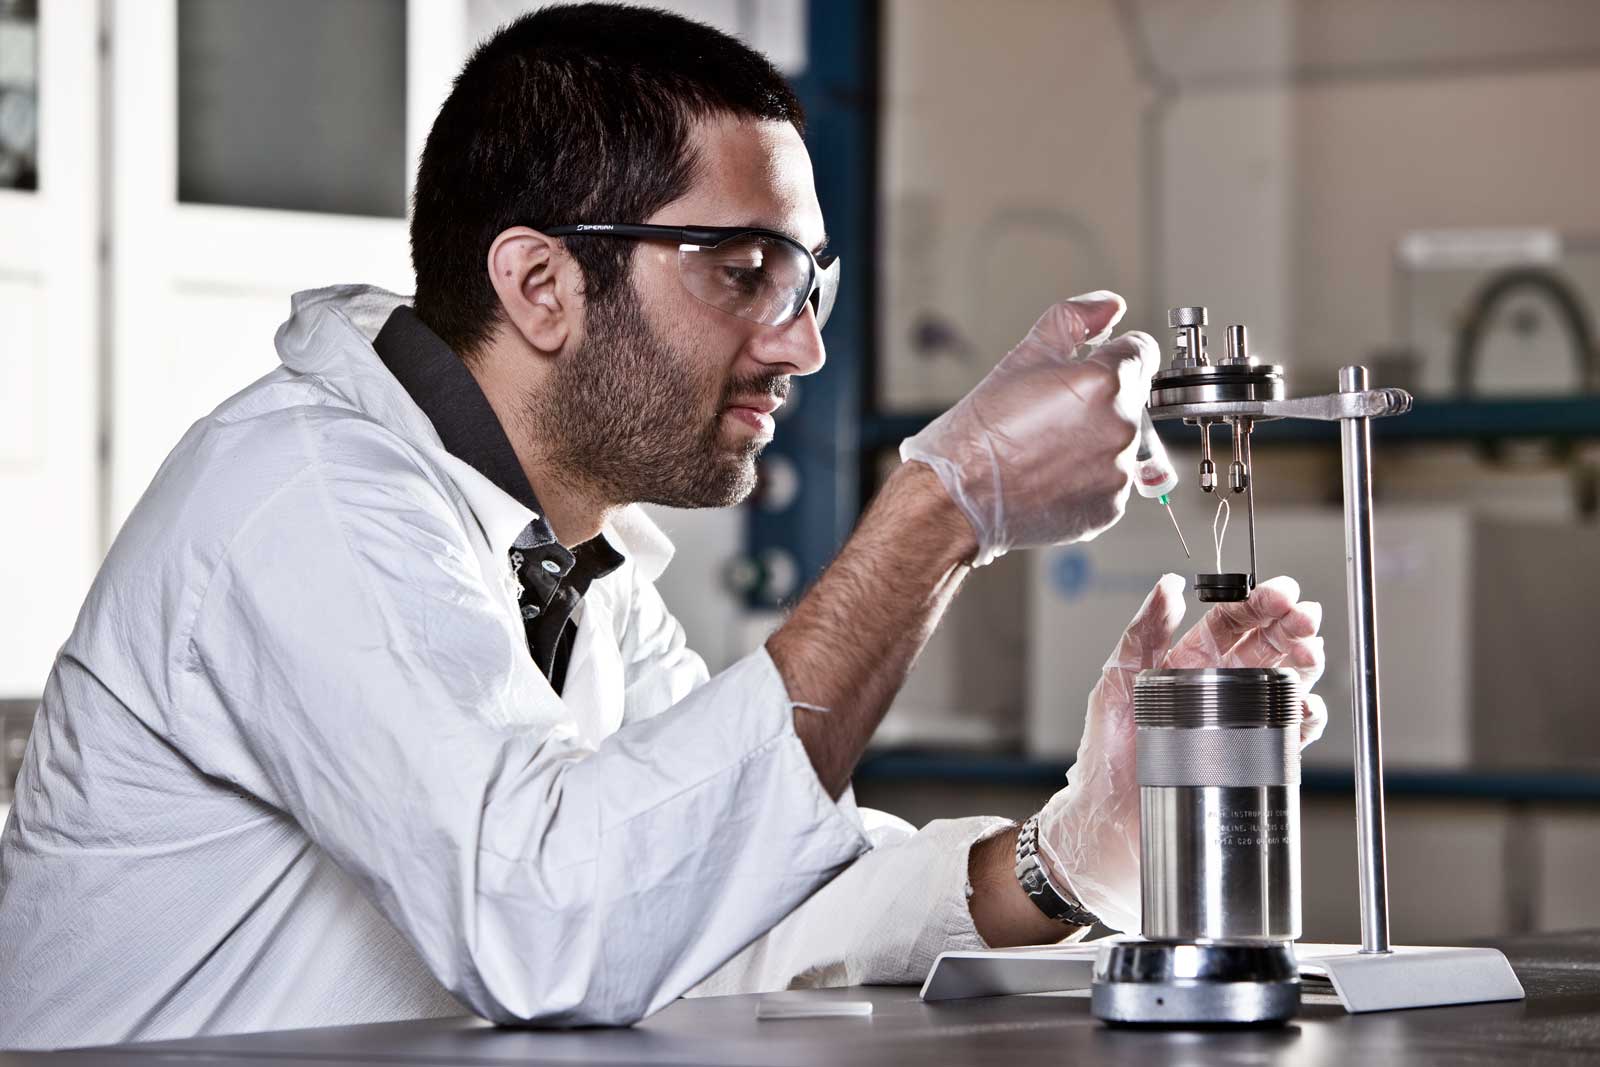 A man with a lab coat with protective eye gear and gloves doing an experiment.